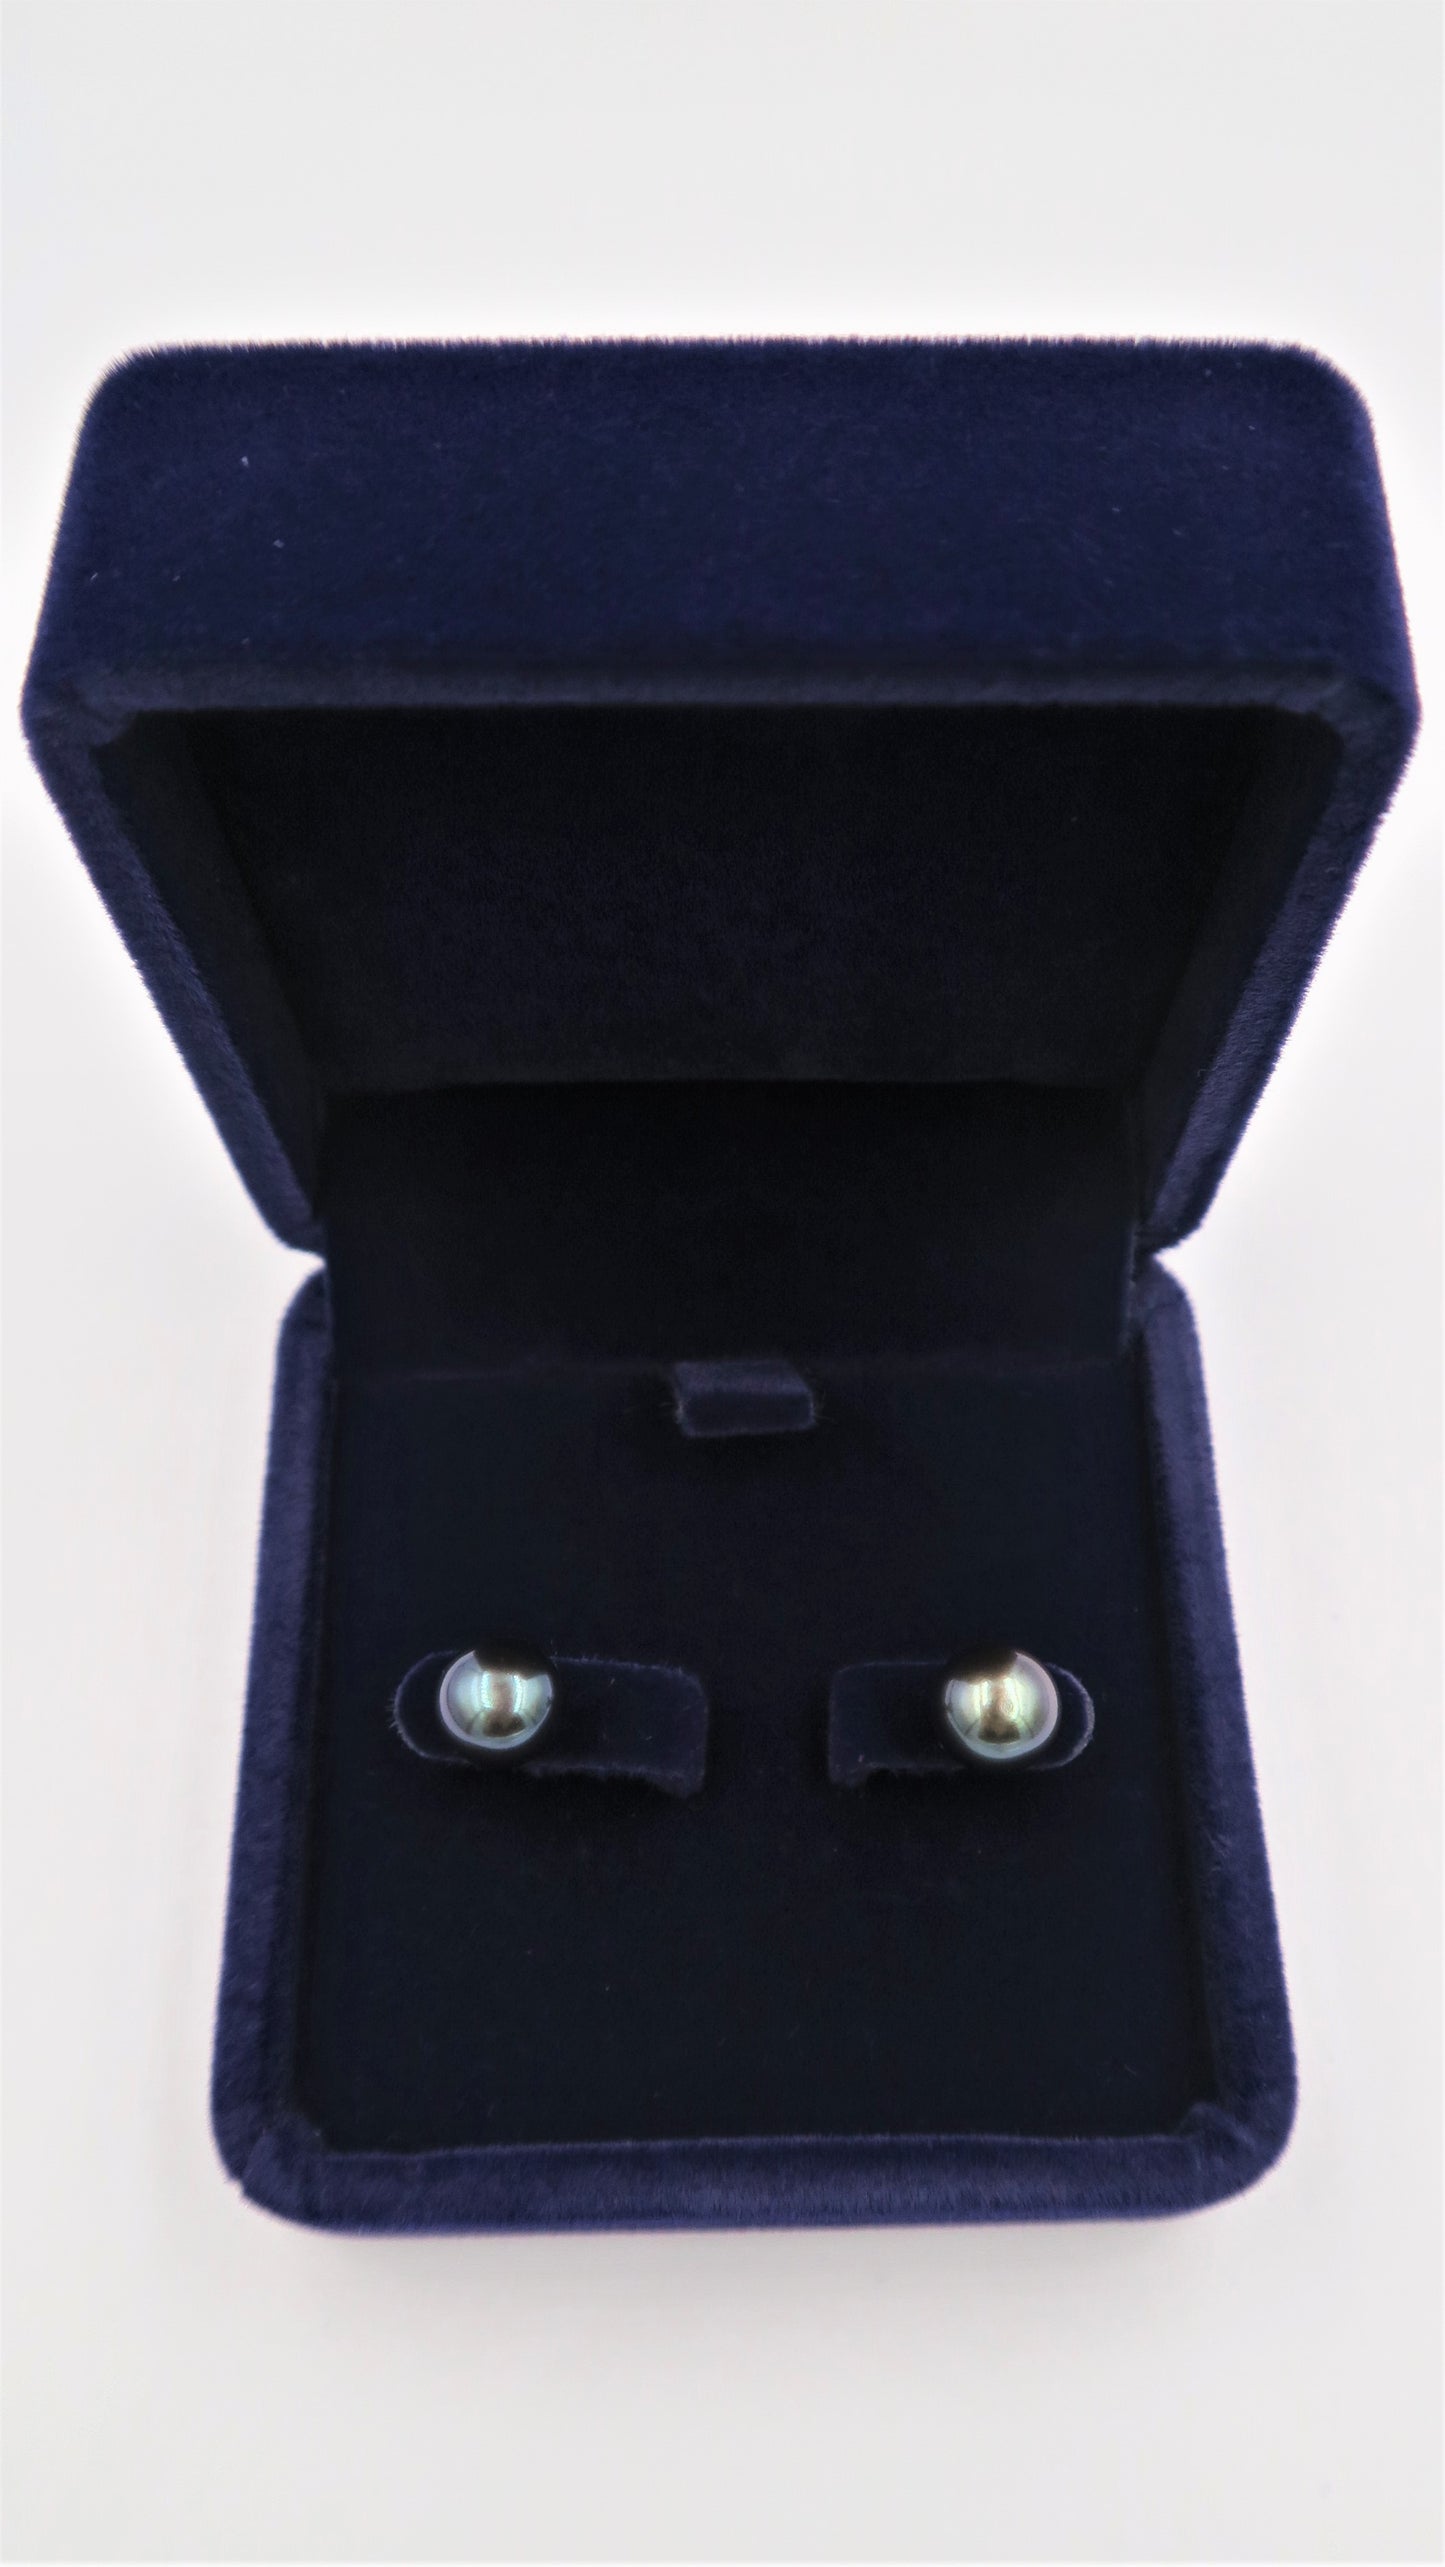 PD - Real Pearl Earrings Celeste Collections Black Peacock Pearls Earring 925 Sterling Silver gift box